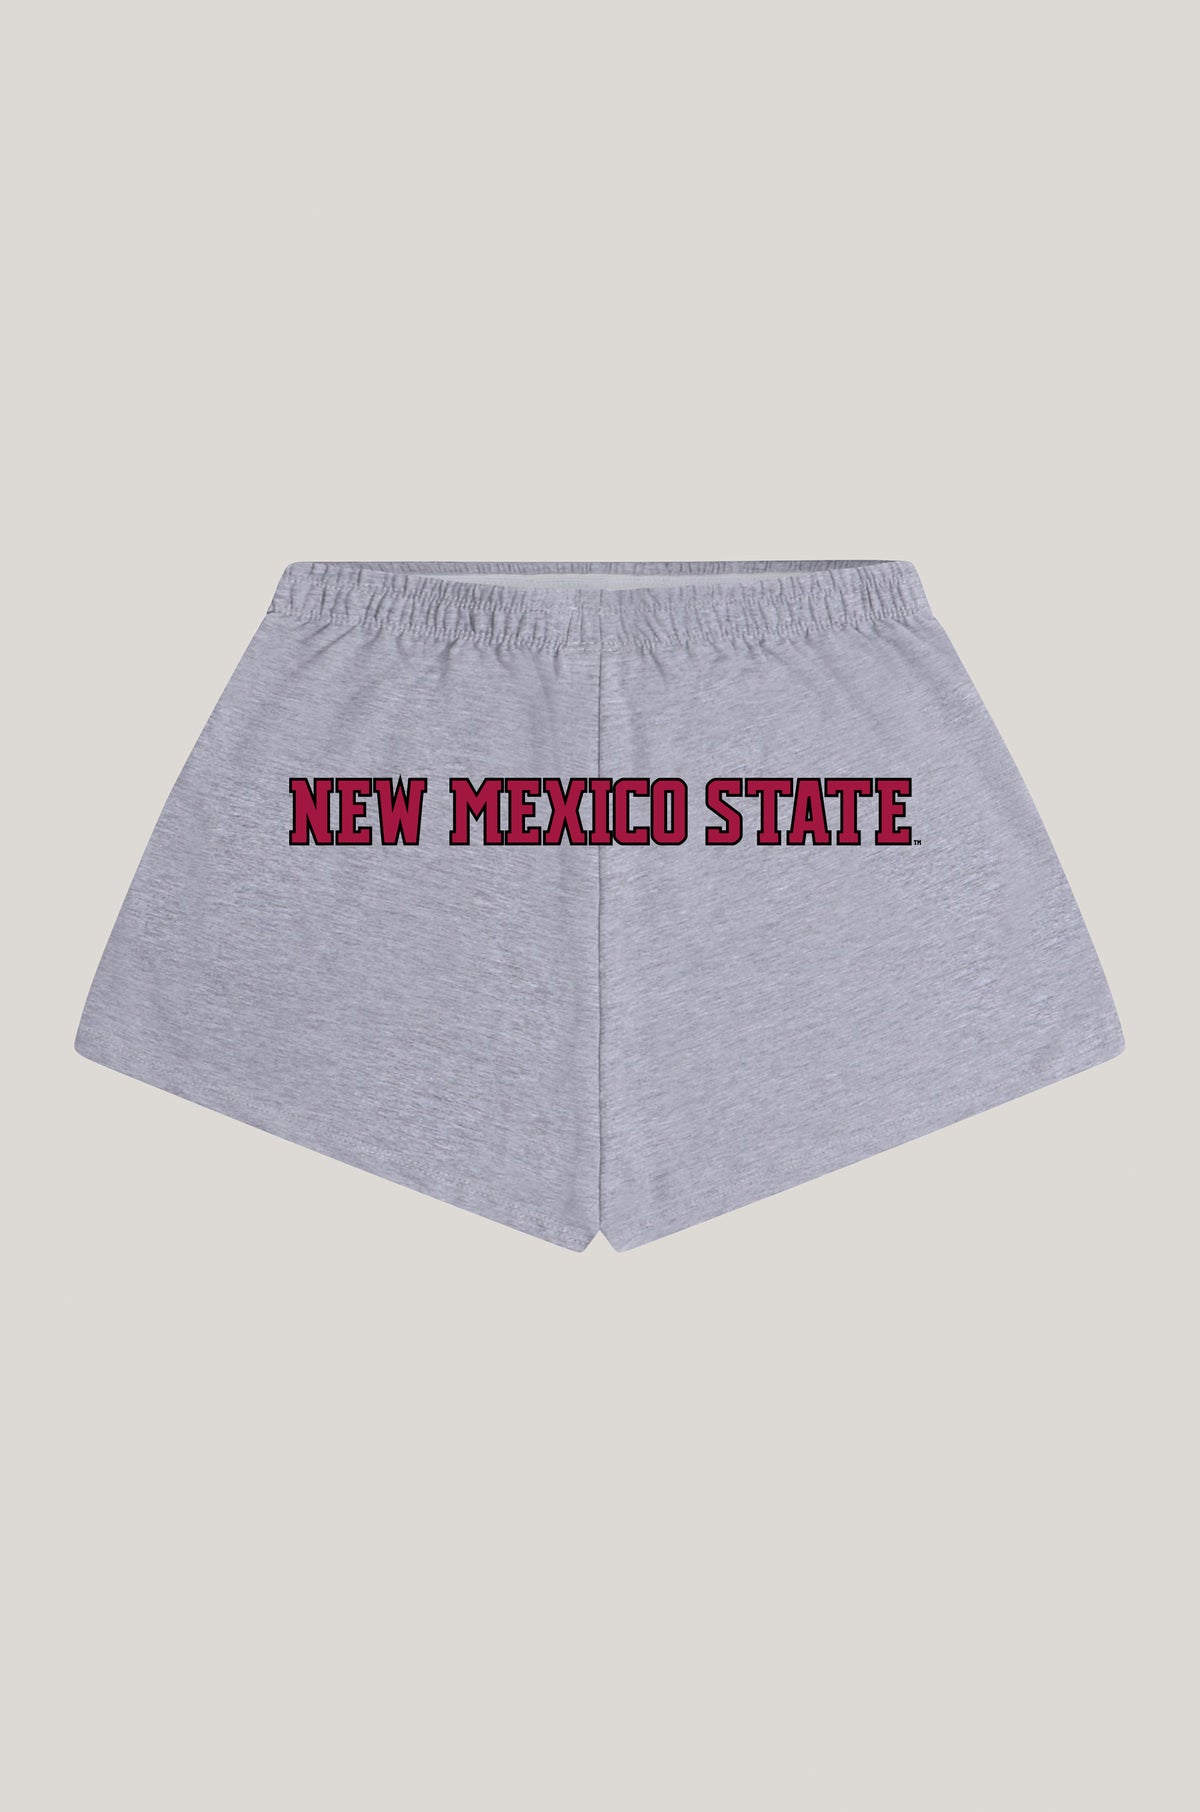 New Mexico State Soffee Shorts